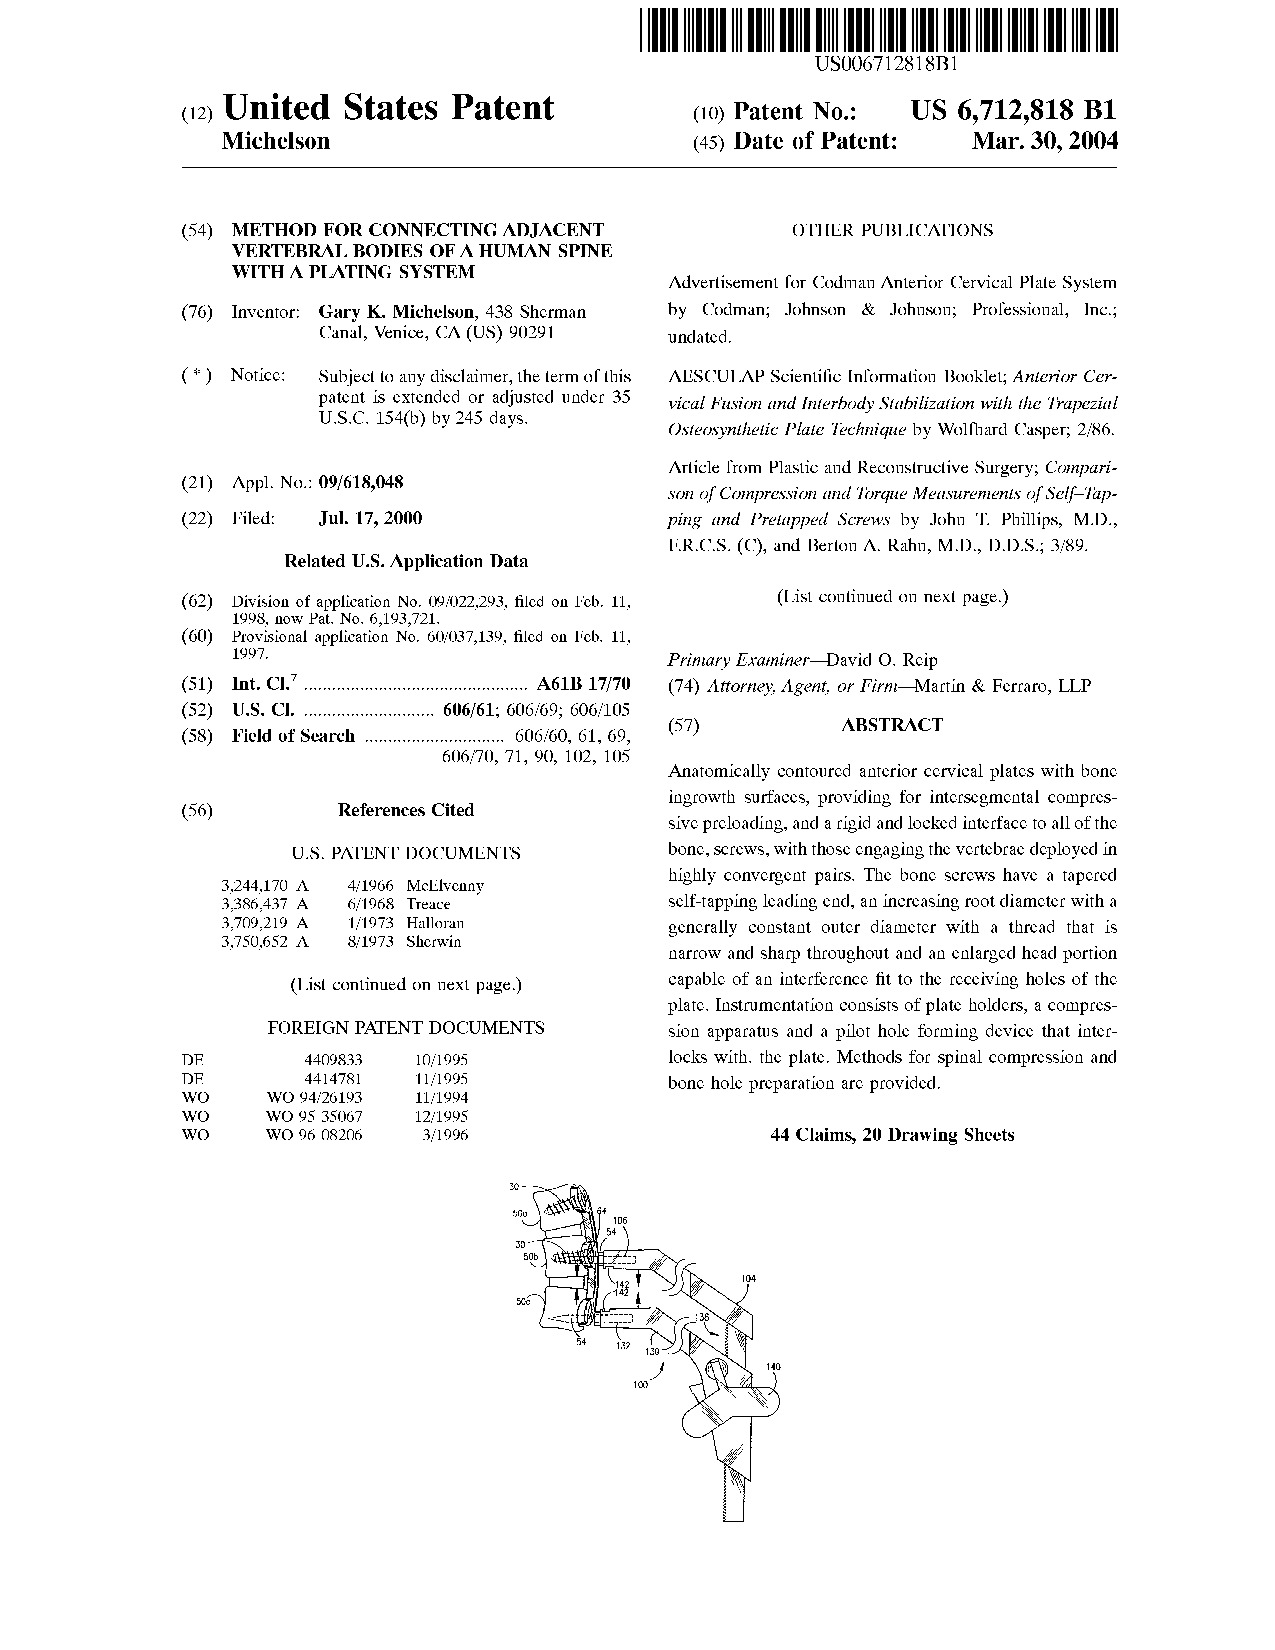 Method for connecting adjacent vertebral bodies of a human spine with a     plating system - Patent 6,712,818